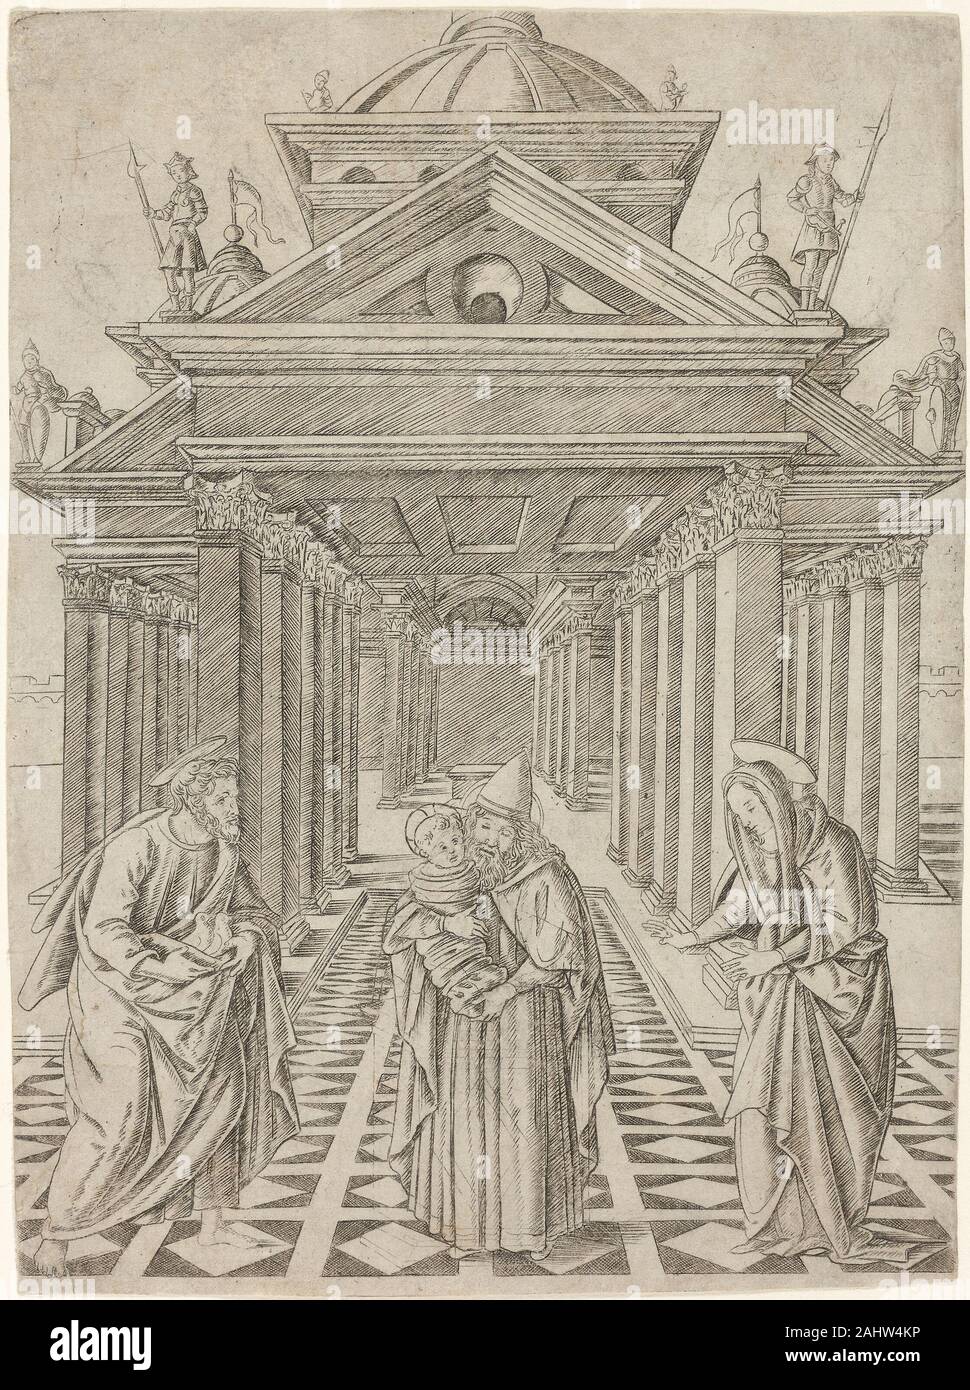 Francesco Rosselli. The Presentation in the Temple, plate four from the Life of the Virgin and Christ. 1465–1475. Italy. Engraving in black on ivory paper Francesco Rosselli combined the long parallel strokes of his engraver’s burin with one-point perspective to create a centrally focused, receding sense of depth. The symmetrical theatrical backdrop frames the foreground figures of Christ, Mary, and two rabbis. The Prophet Amos (1934.5), is also attributed to the artist, showing his range with a finer approach of lightly hatched shadows and darker outlines. In contrast, Giovanni da Brescia ach Stock Photo